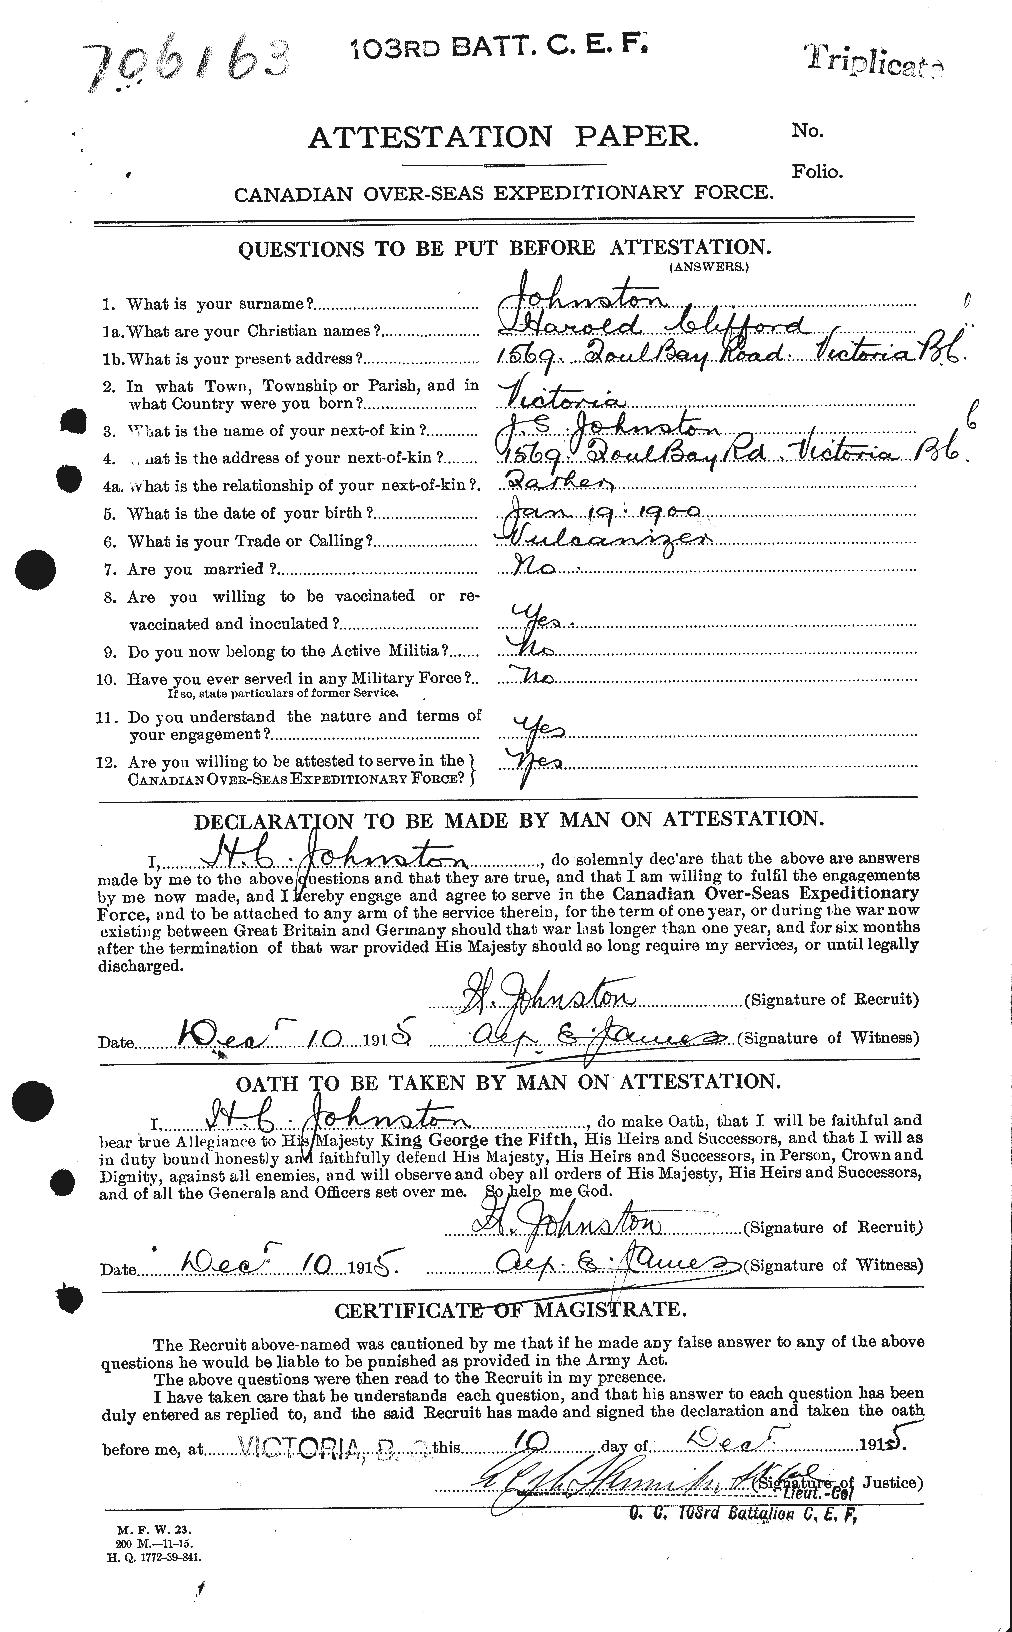 Personnel Records of the First World War - CEF 419488a